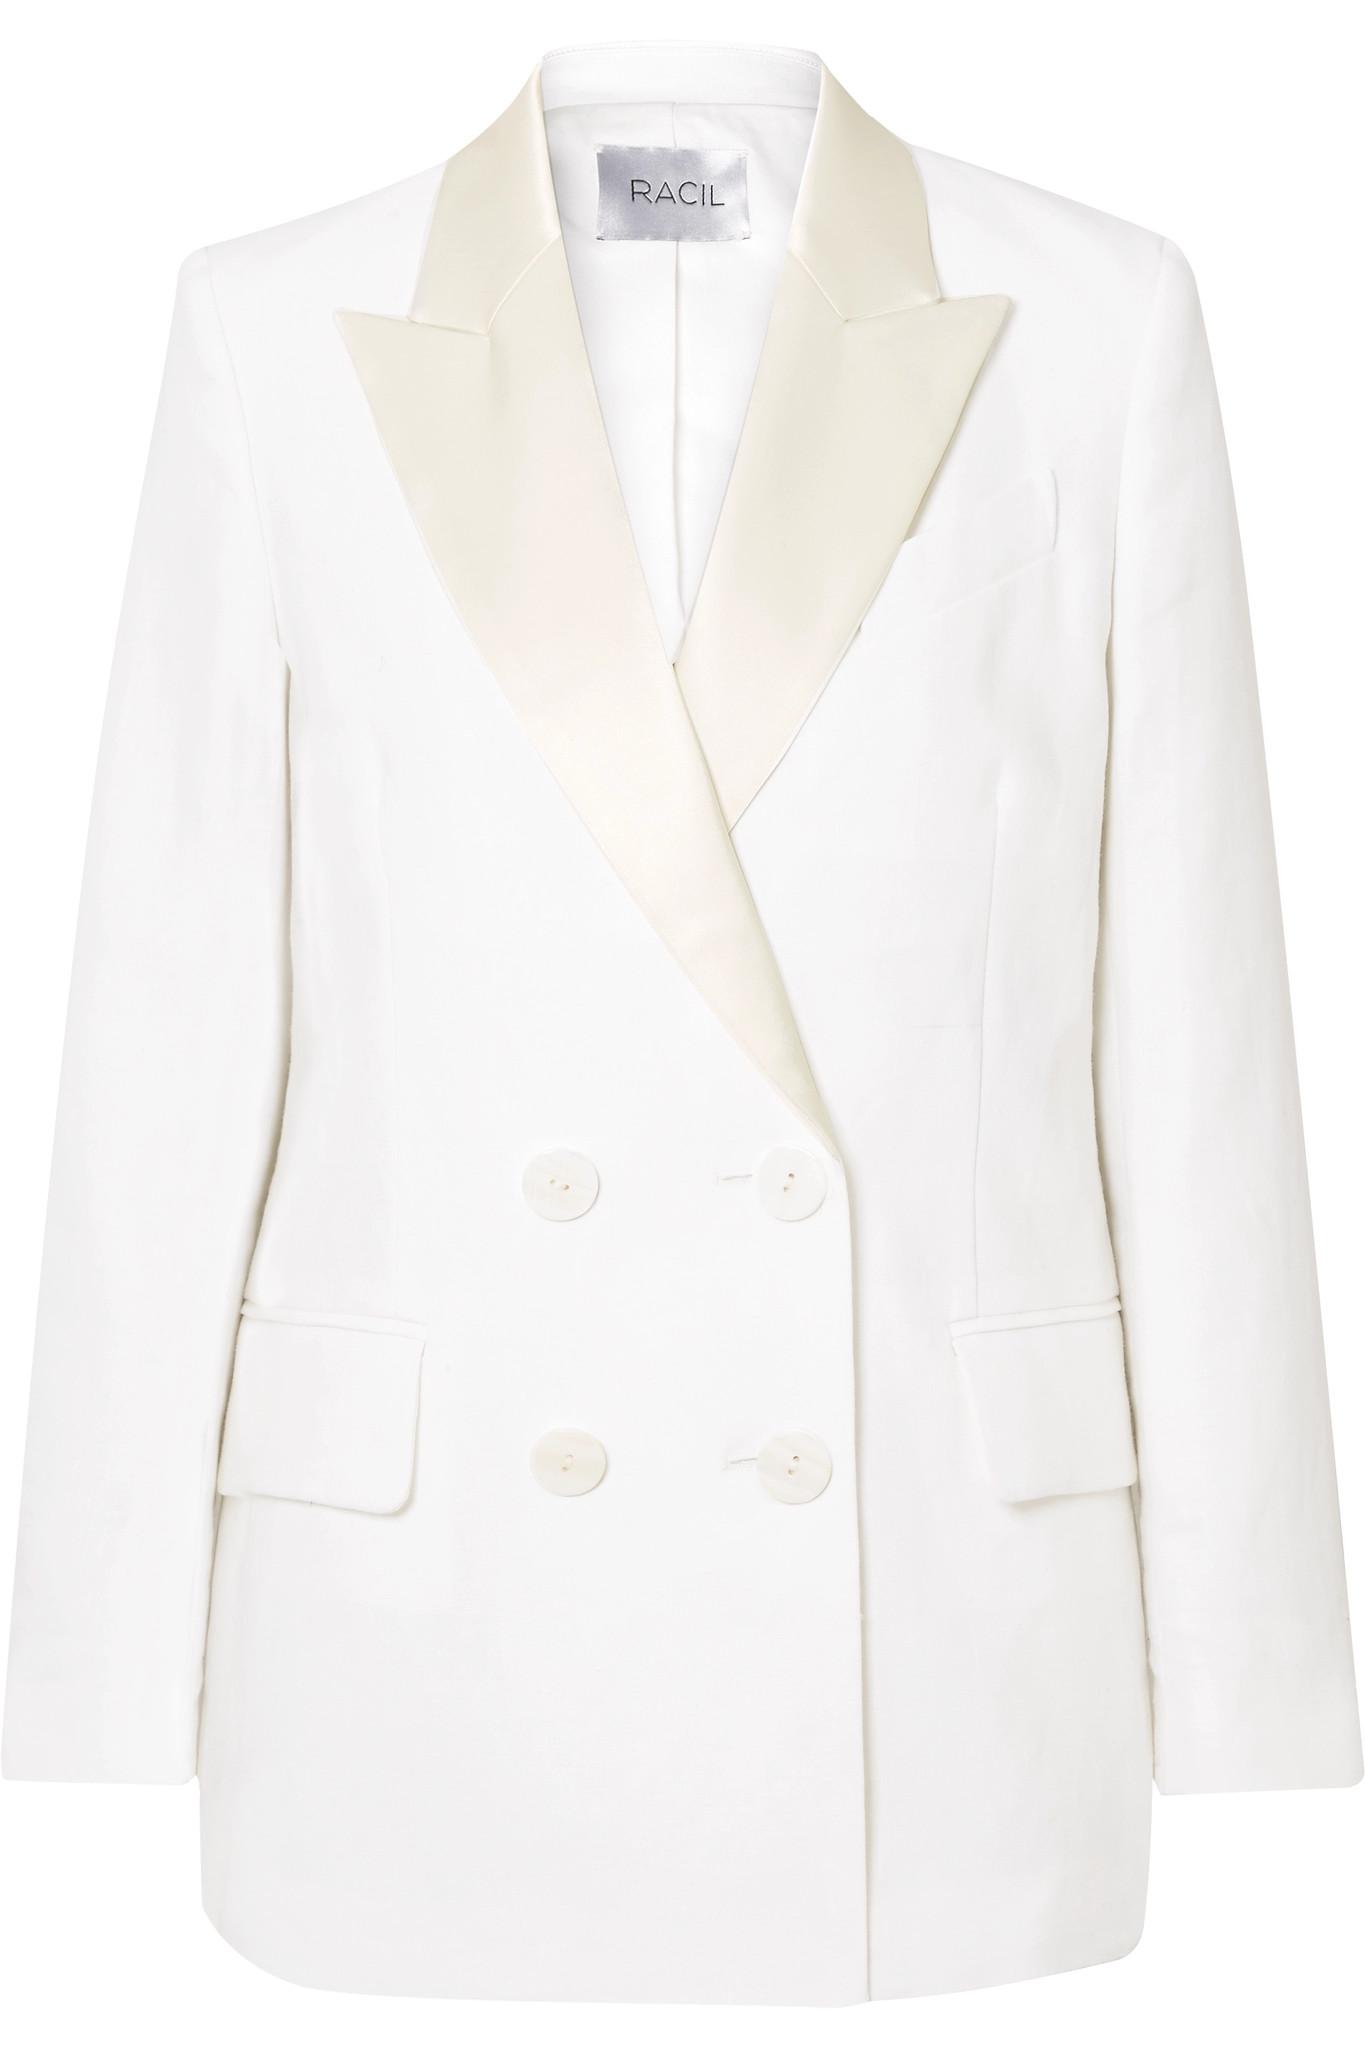 Racil Casablanca Double-breasted Satin-trimmed Linen Blazer in White - Lyst